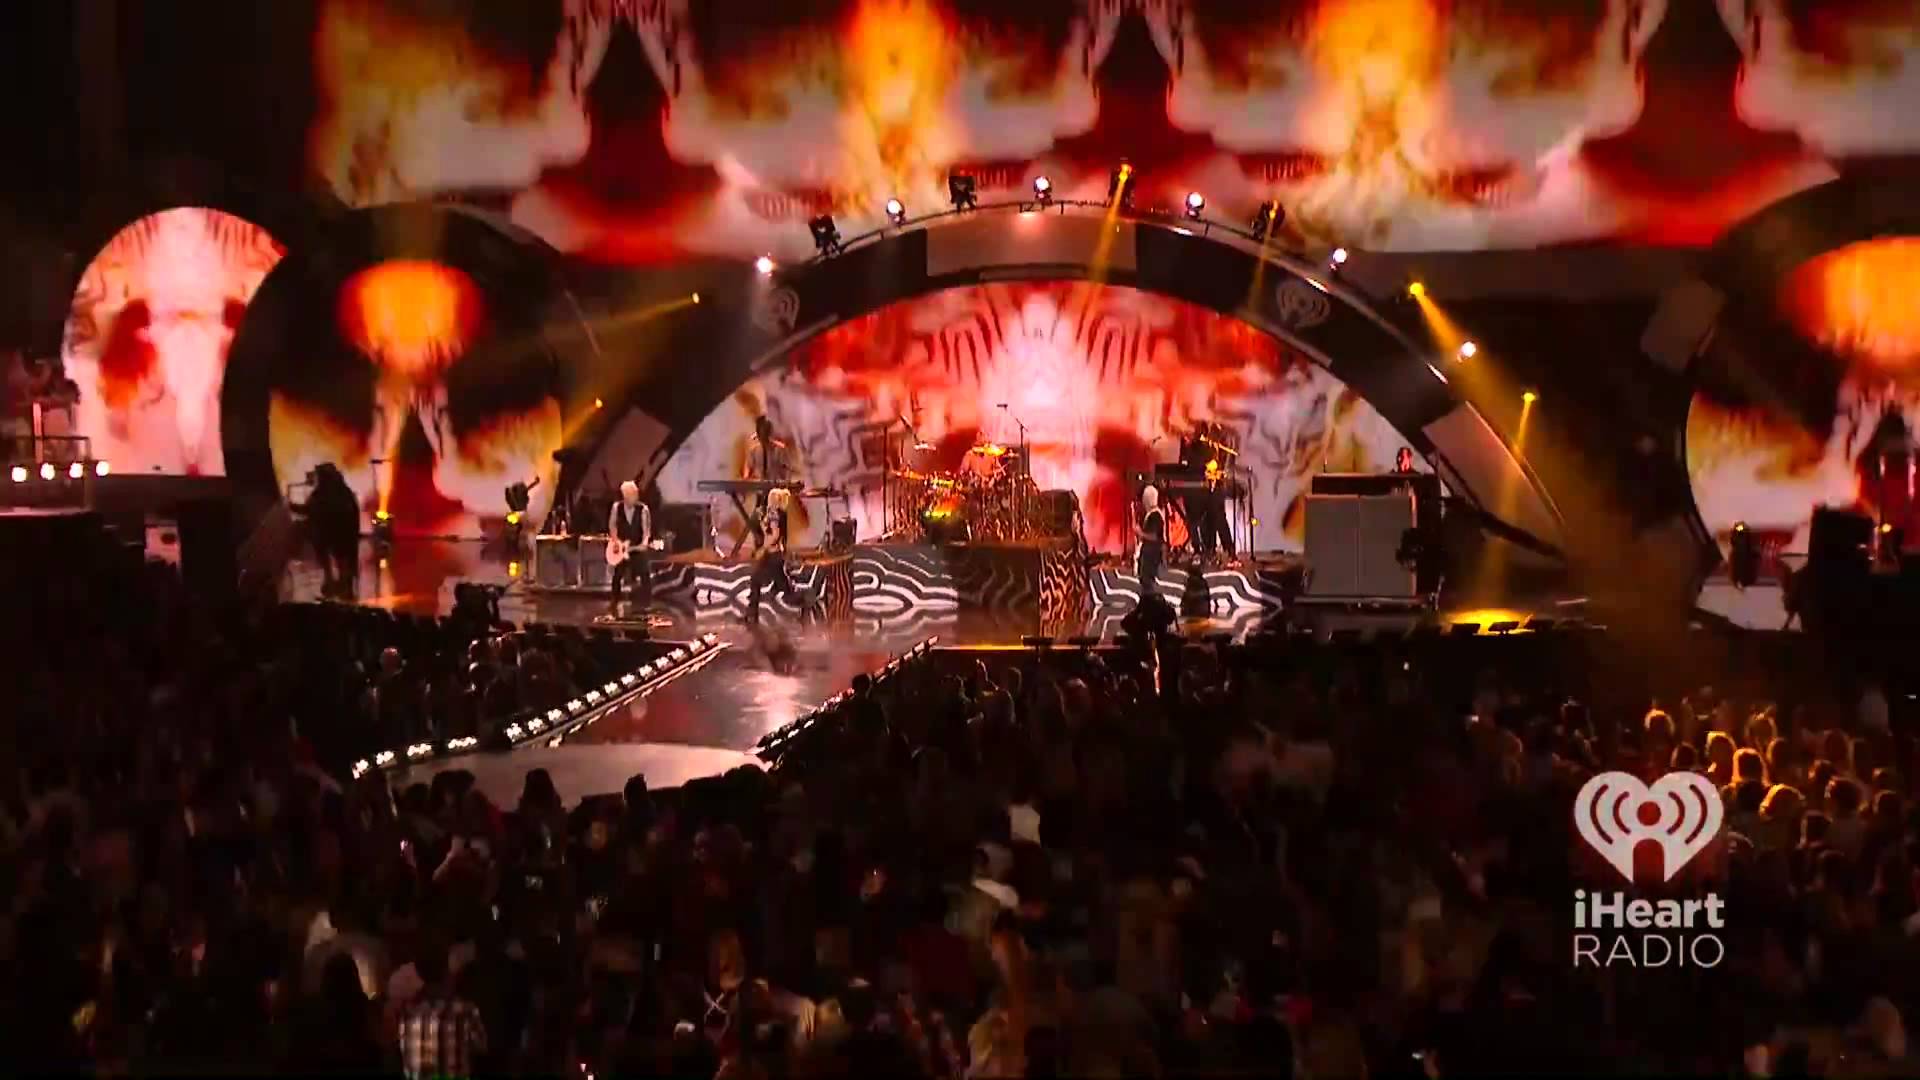 No Doubt , HD, It's My Life, live, iHeartRadio Music Festival 2012